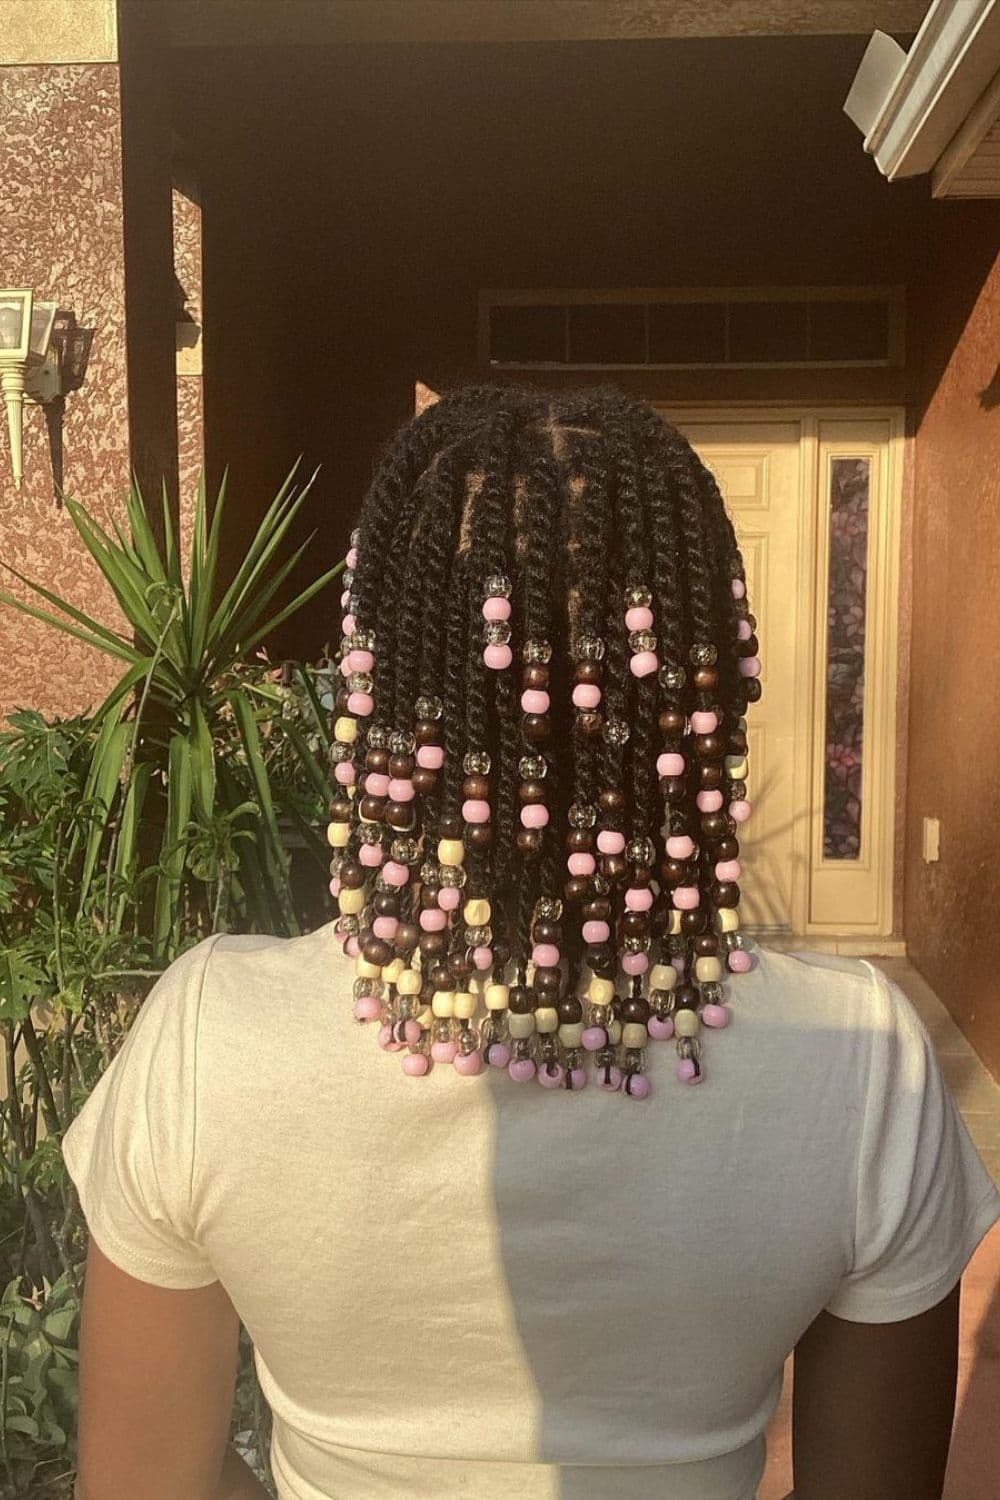 A person with twists with beads hairstyle.